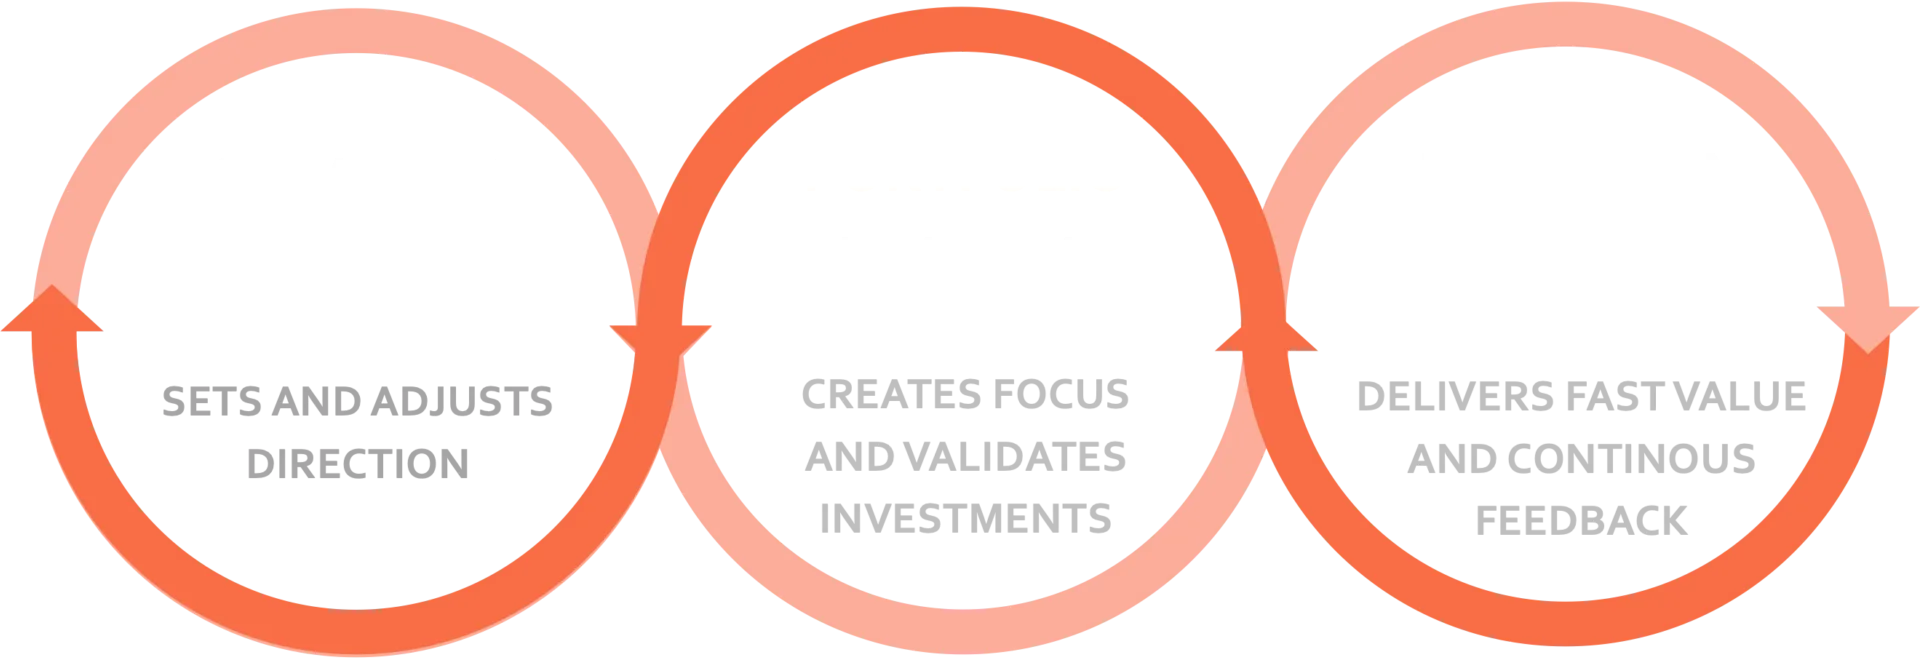 strategy routine
portfolio routine
execution routine
sets and adjust direction
creates focus and validates investments
delvers fast value and continuous feedback